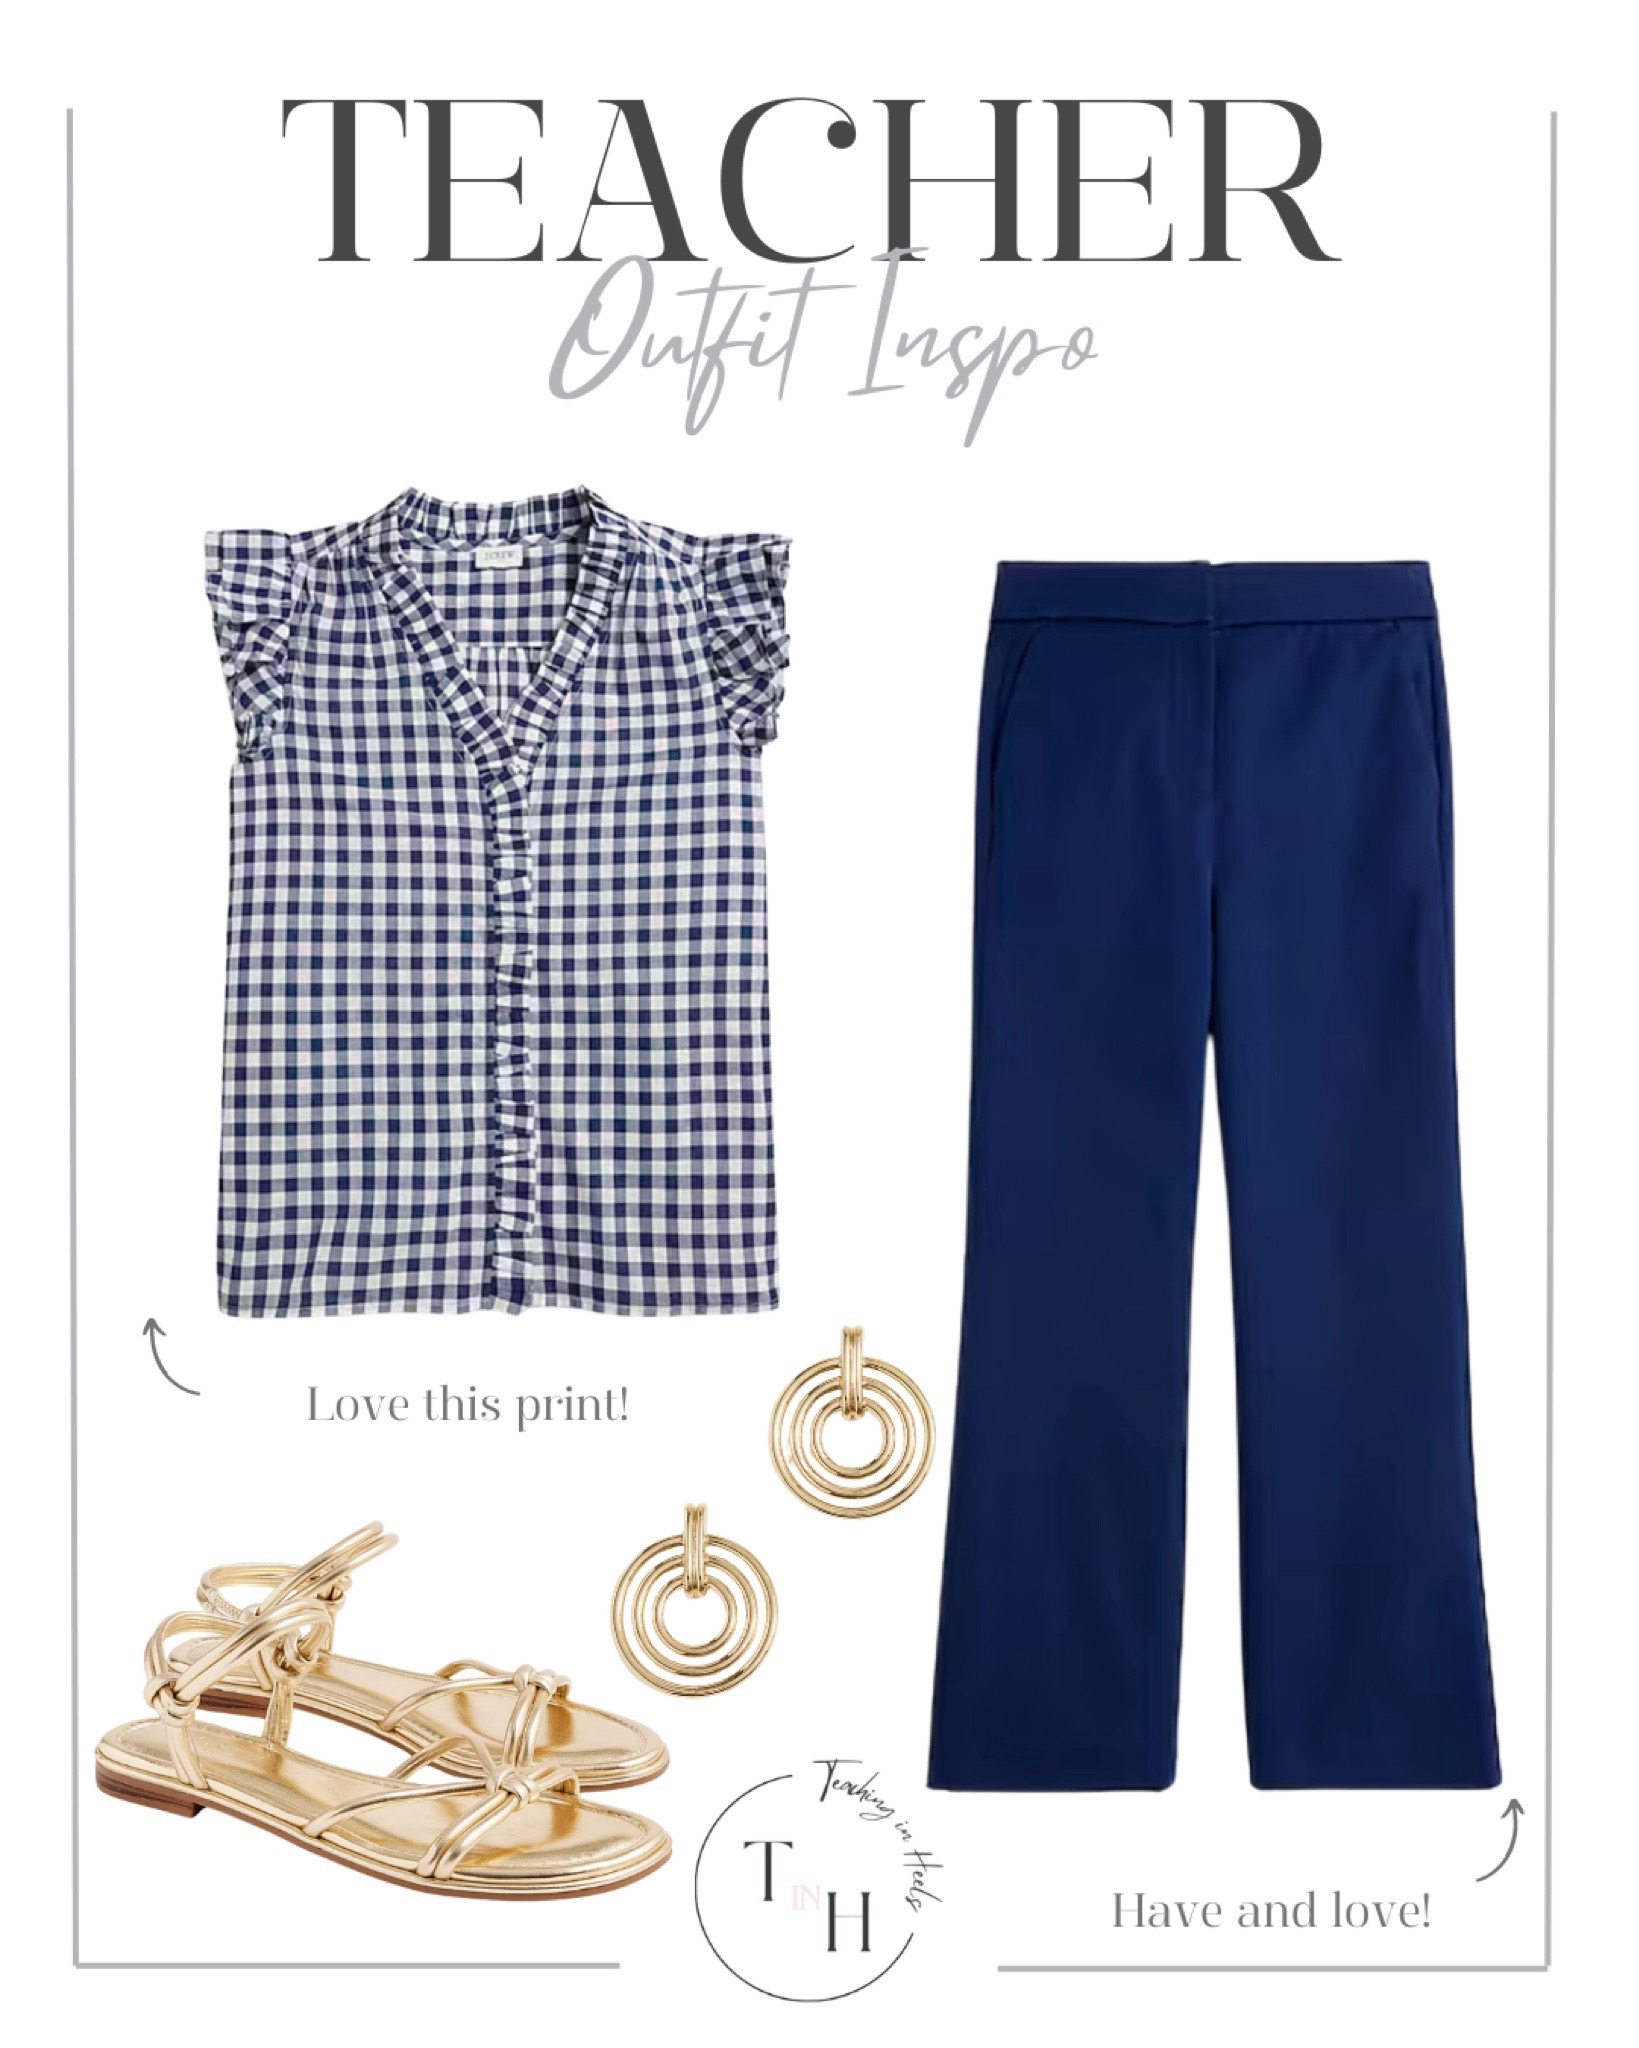 Chic & Comfortable: Spring Fashion for Teachers

spring, spring fashion, spring outfit, teacher outfit, workwear, work outfit, navy pants